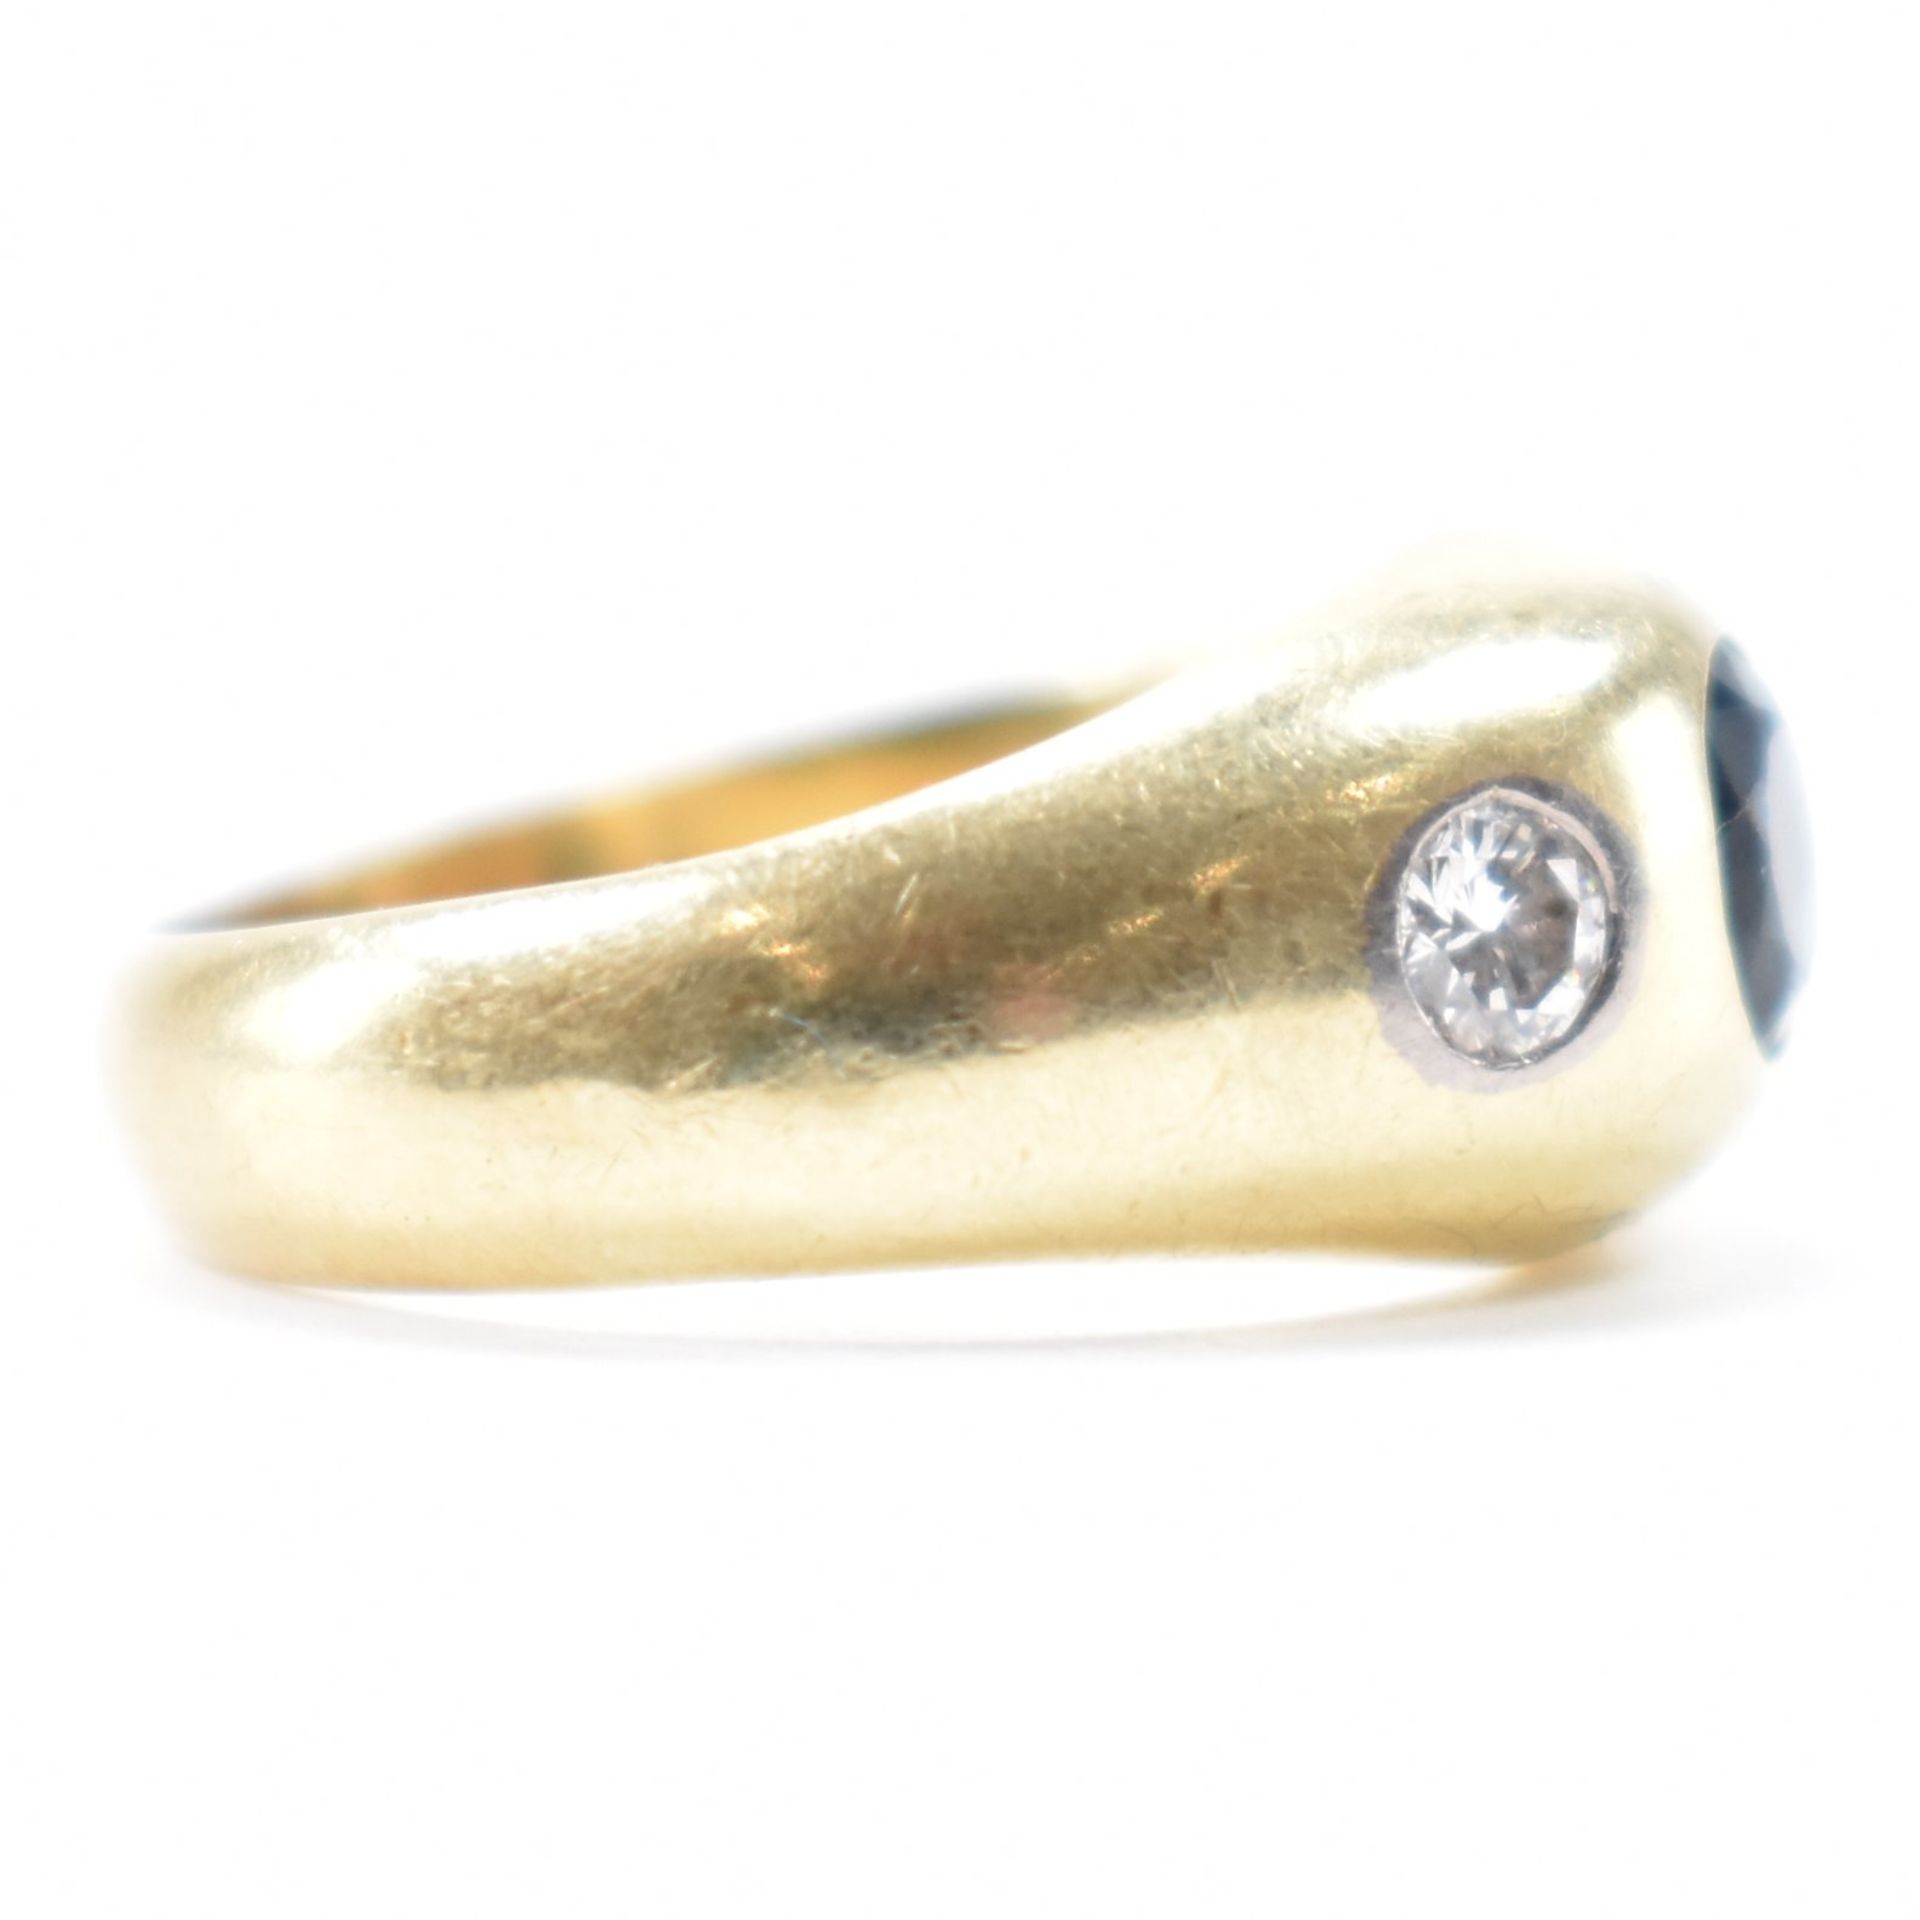 VINTAGE GOLD DIAMOND & SAPPHIRE GYPSY RING - Image 5 of 9